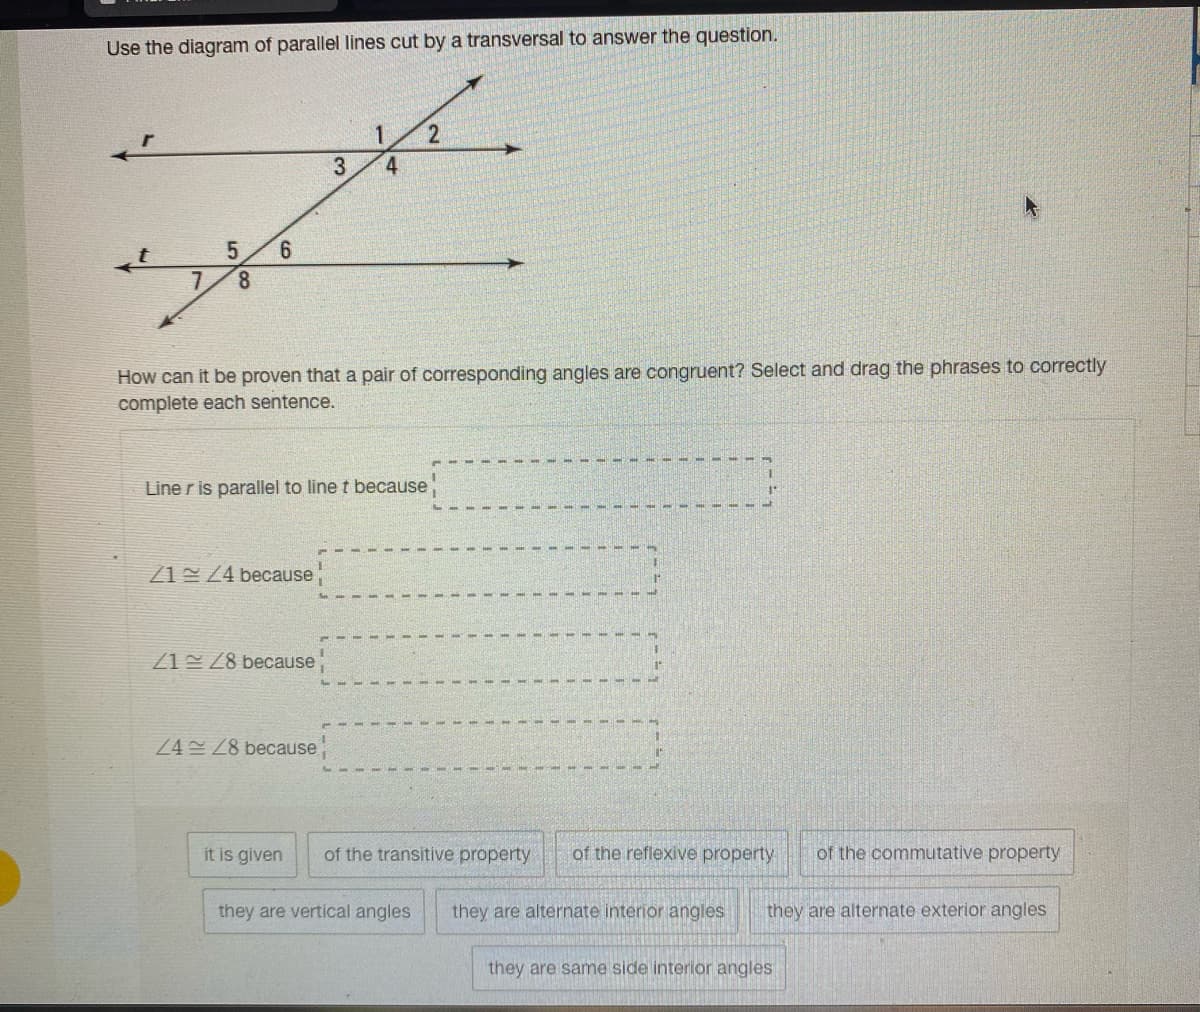 Use the diagram of parallel lines cut by a transversal to answer the question.
4
6.
7.
8.
How can it be proven that a pair of corresponding angles are congruent? Select and drag the phrases to correctly
complete each sentence.
Line r is parallel to line t because
Z1 Z4 because
Z1 Z8 because
24 Z8 because
it is given
of the transitive property
of the reflexive property
of the commutative property
they are vertical angles
they are alternate interior angles
they are alternate exterior angles
they are same side interior angles
